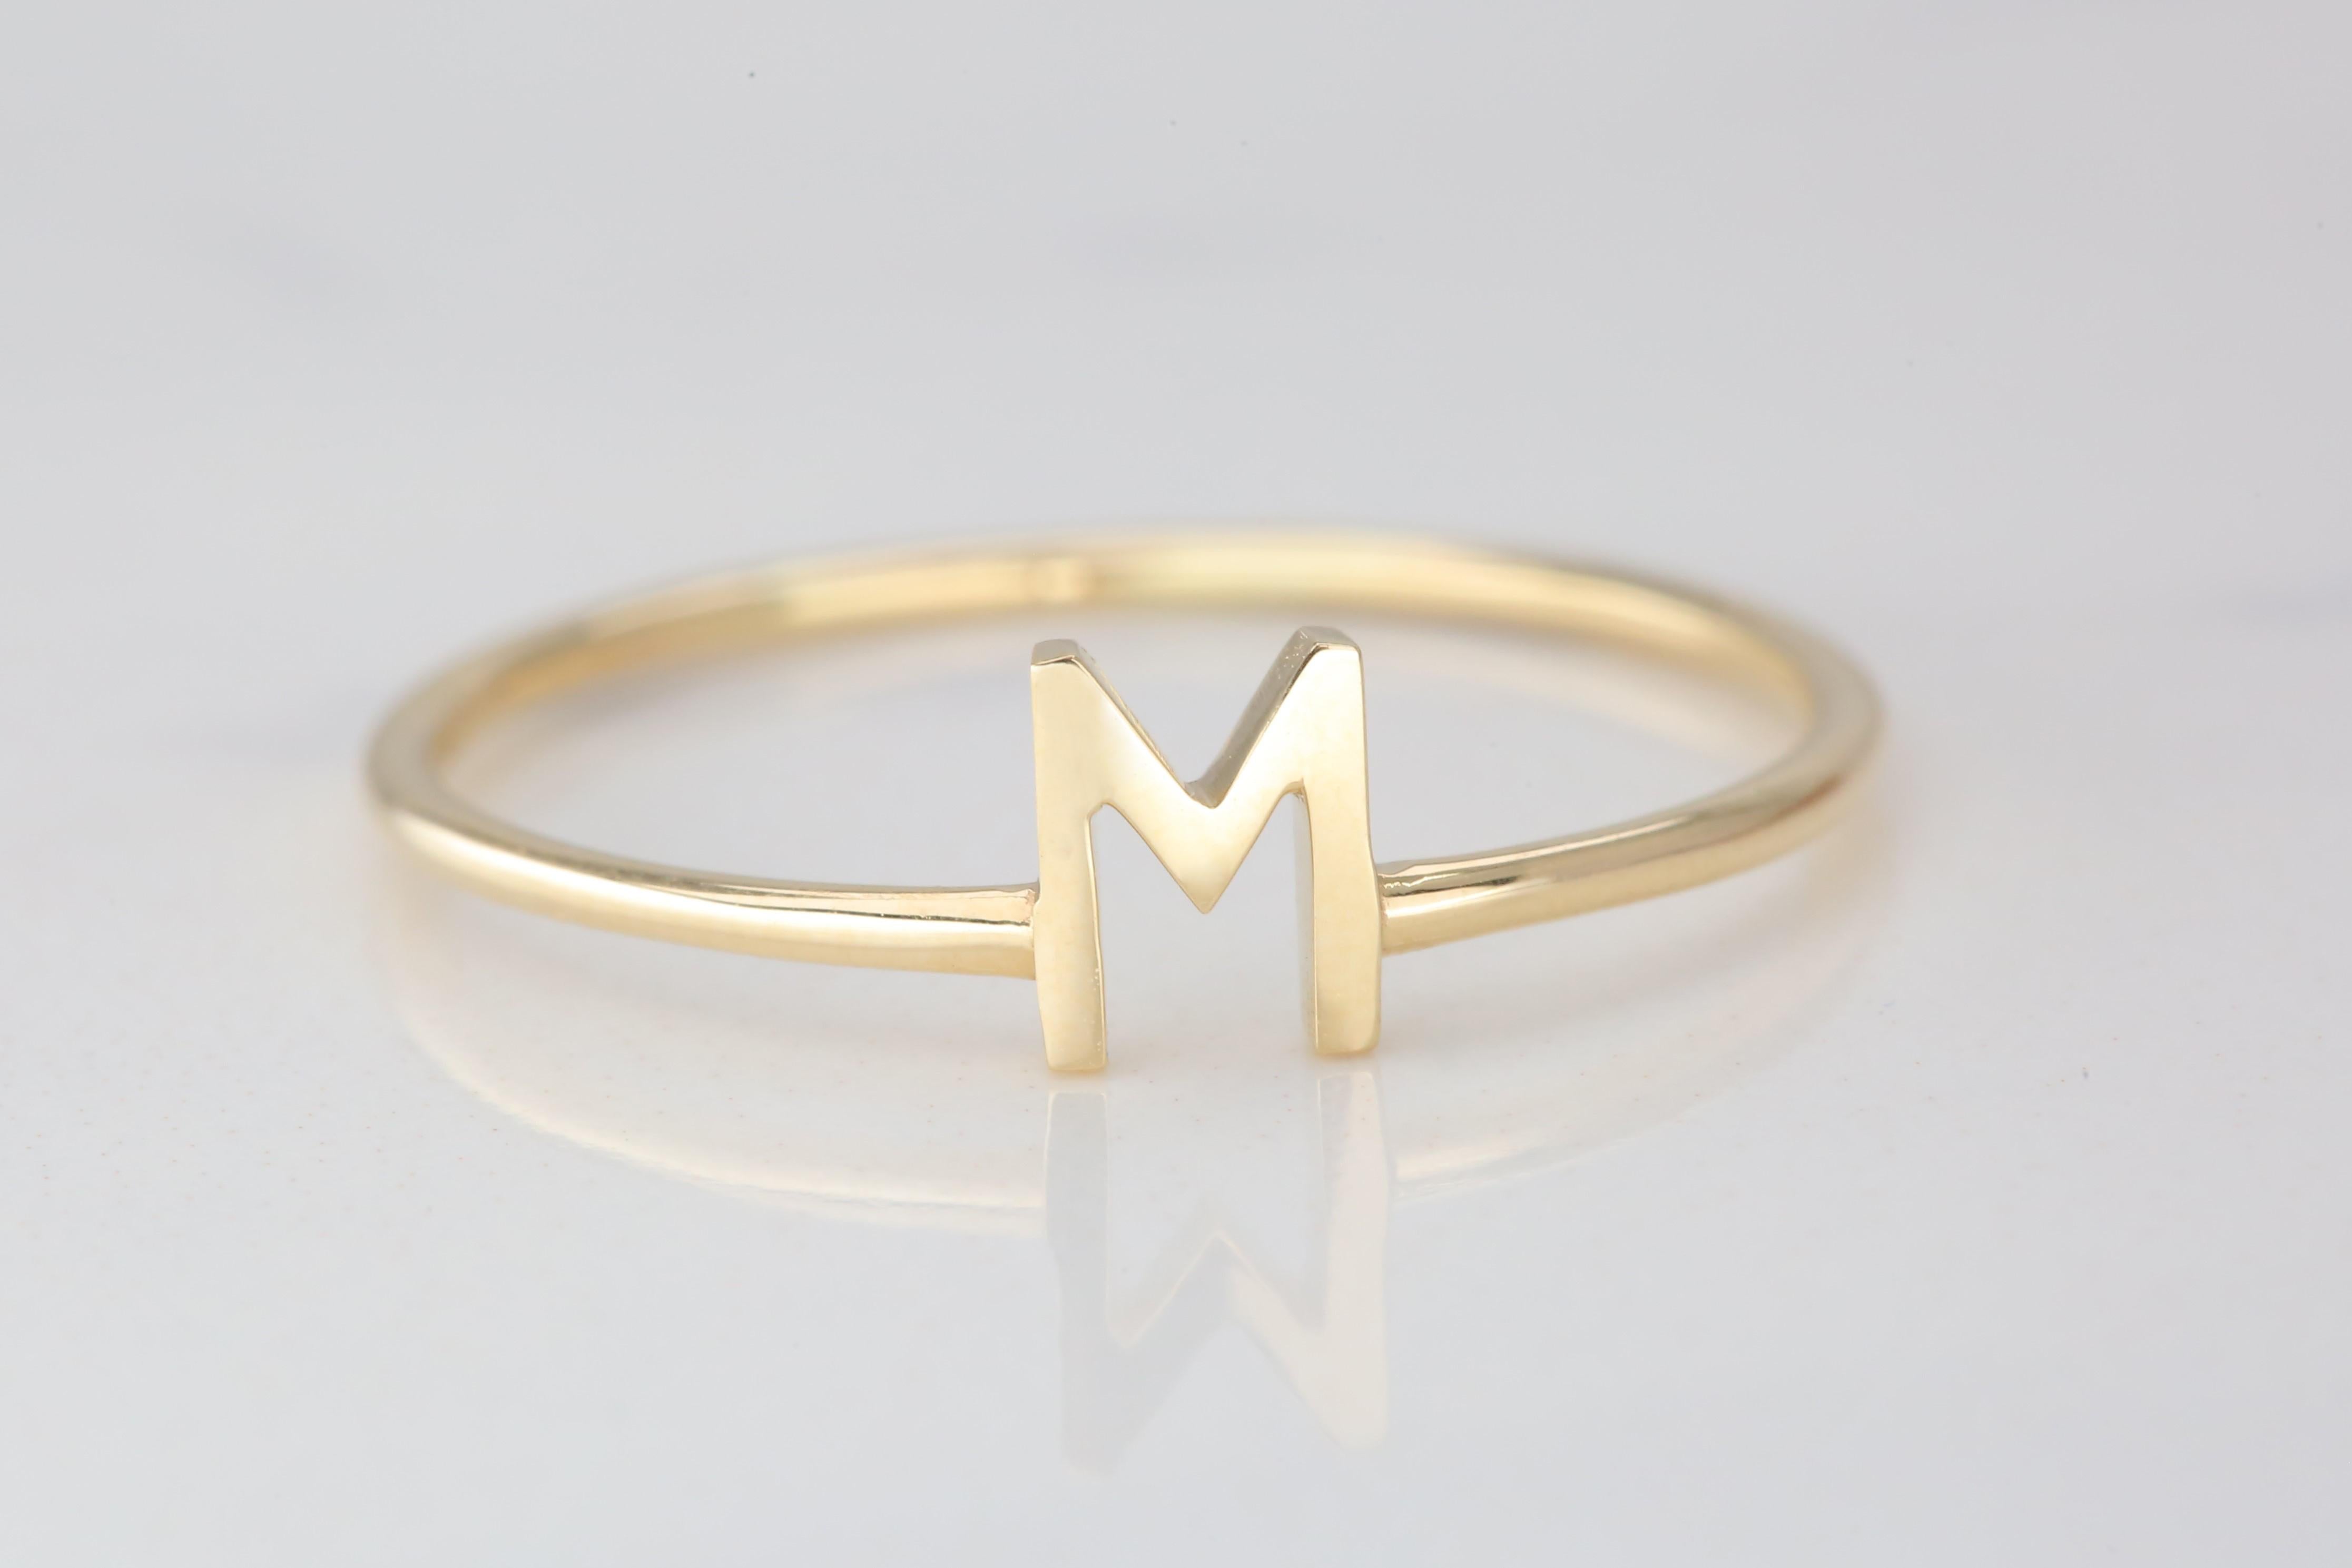 For Sale:  14K Gold Initial M Letter Ring, Personalized Initial Letter Ring 4